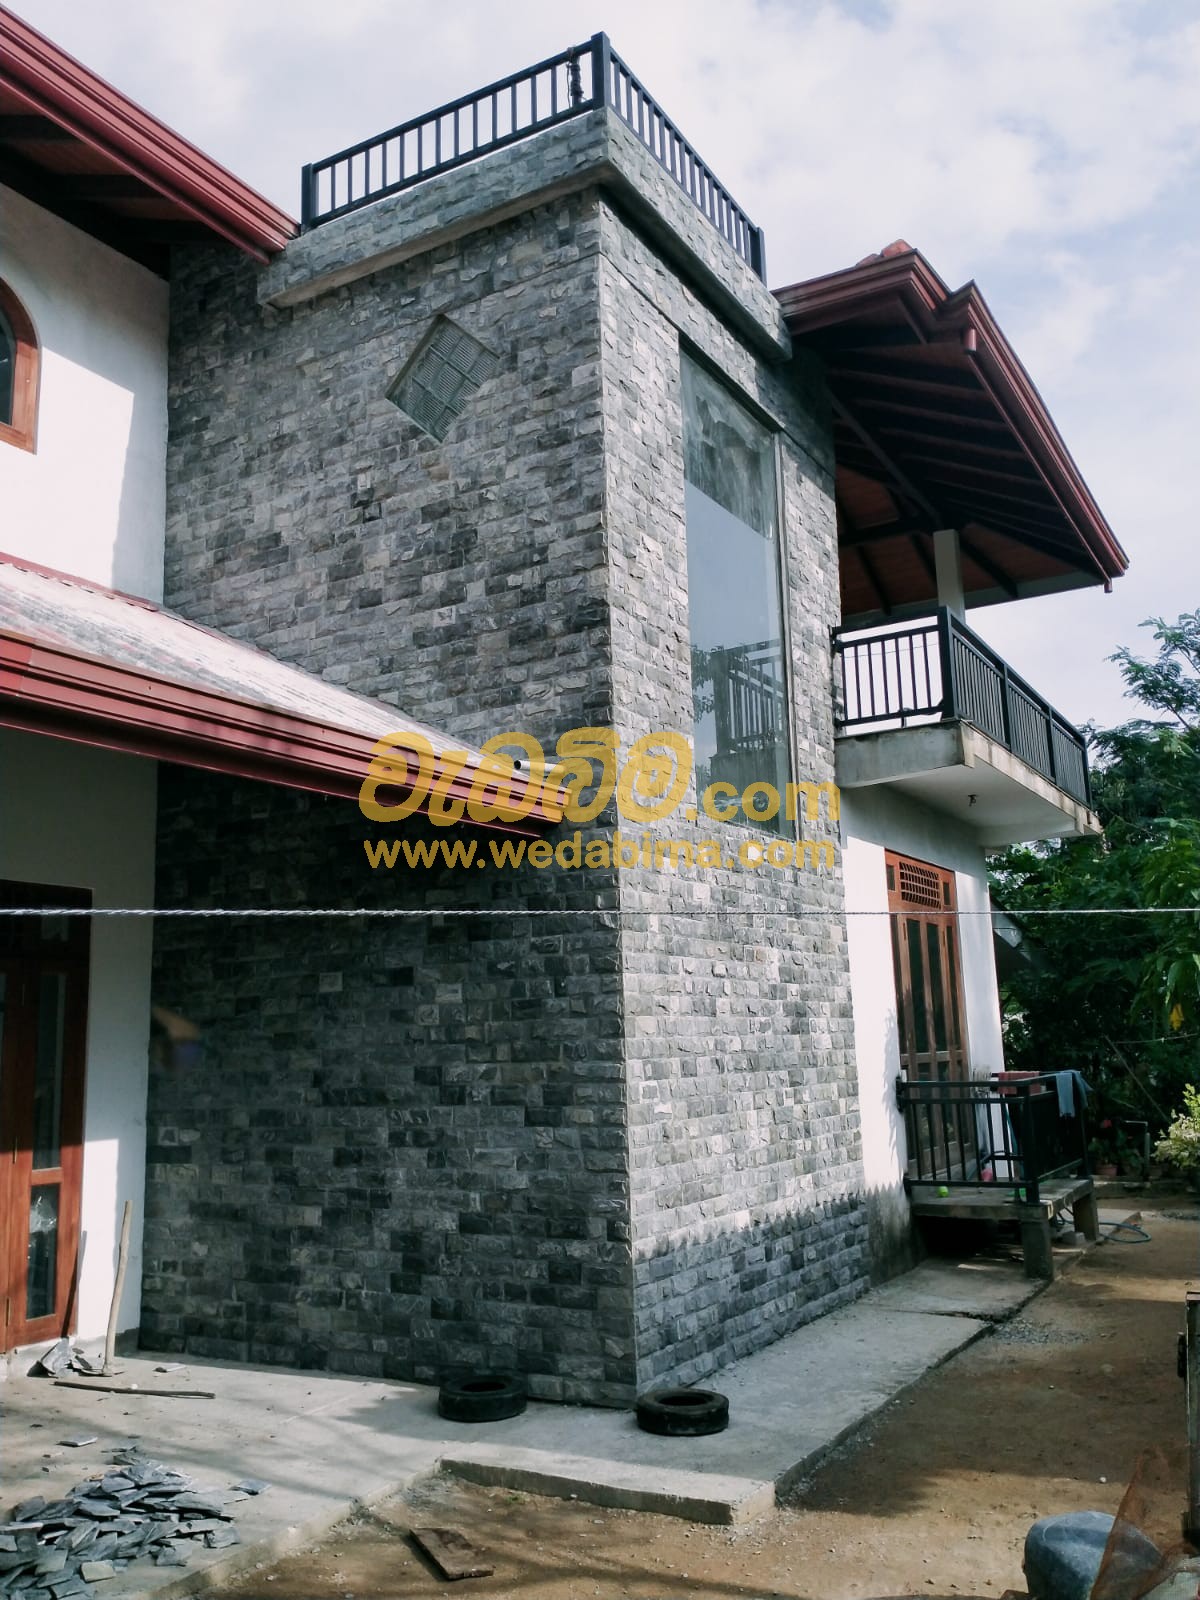 Point stone for best price in Sri Lanka - Galle